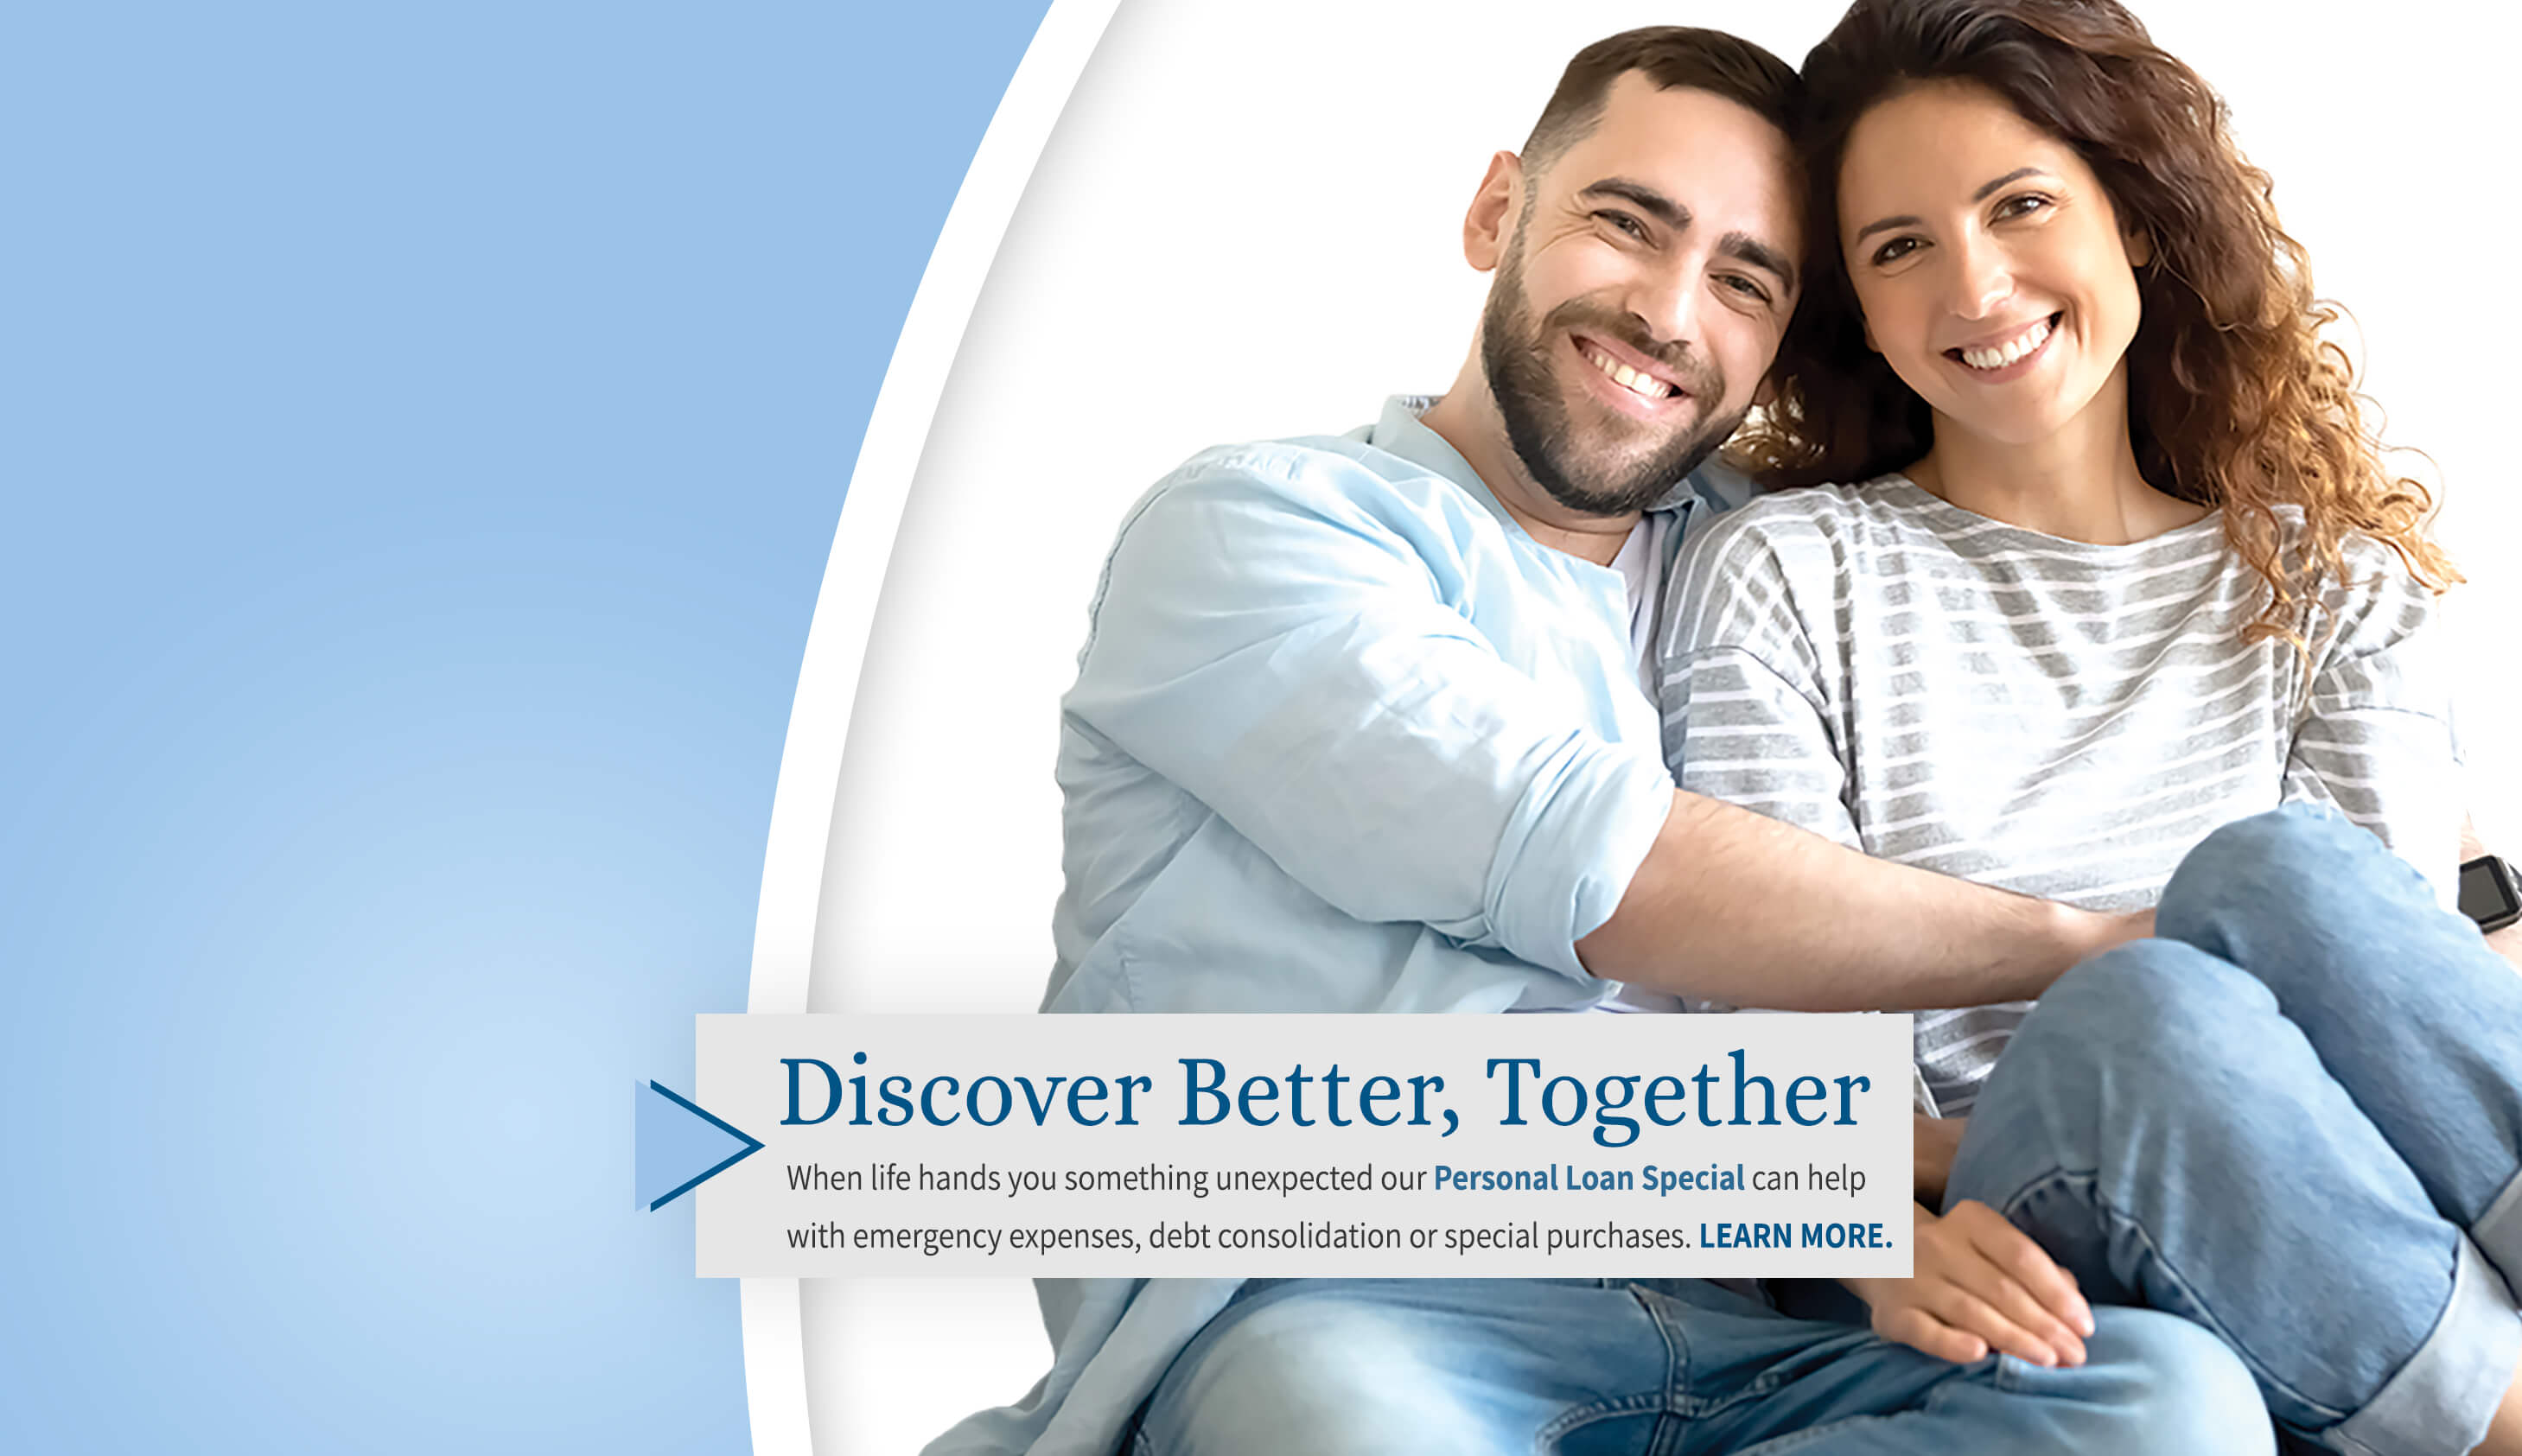 Discover Better, Together. When life hand you something unexpected our Personal Loan Special can help with emergency expenses, debt consolidation or special purchases. Learn more. 